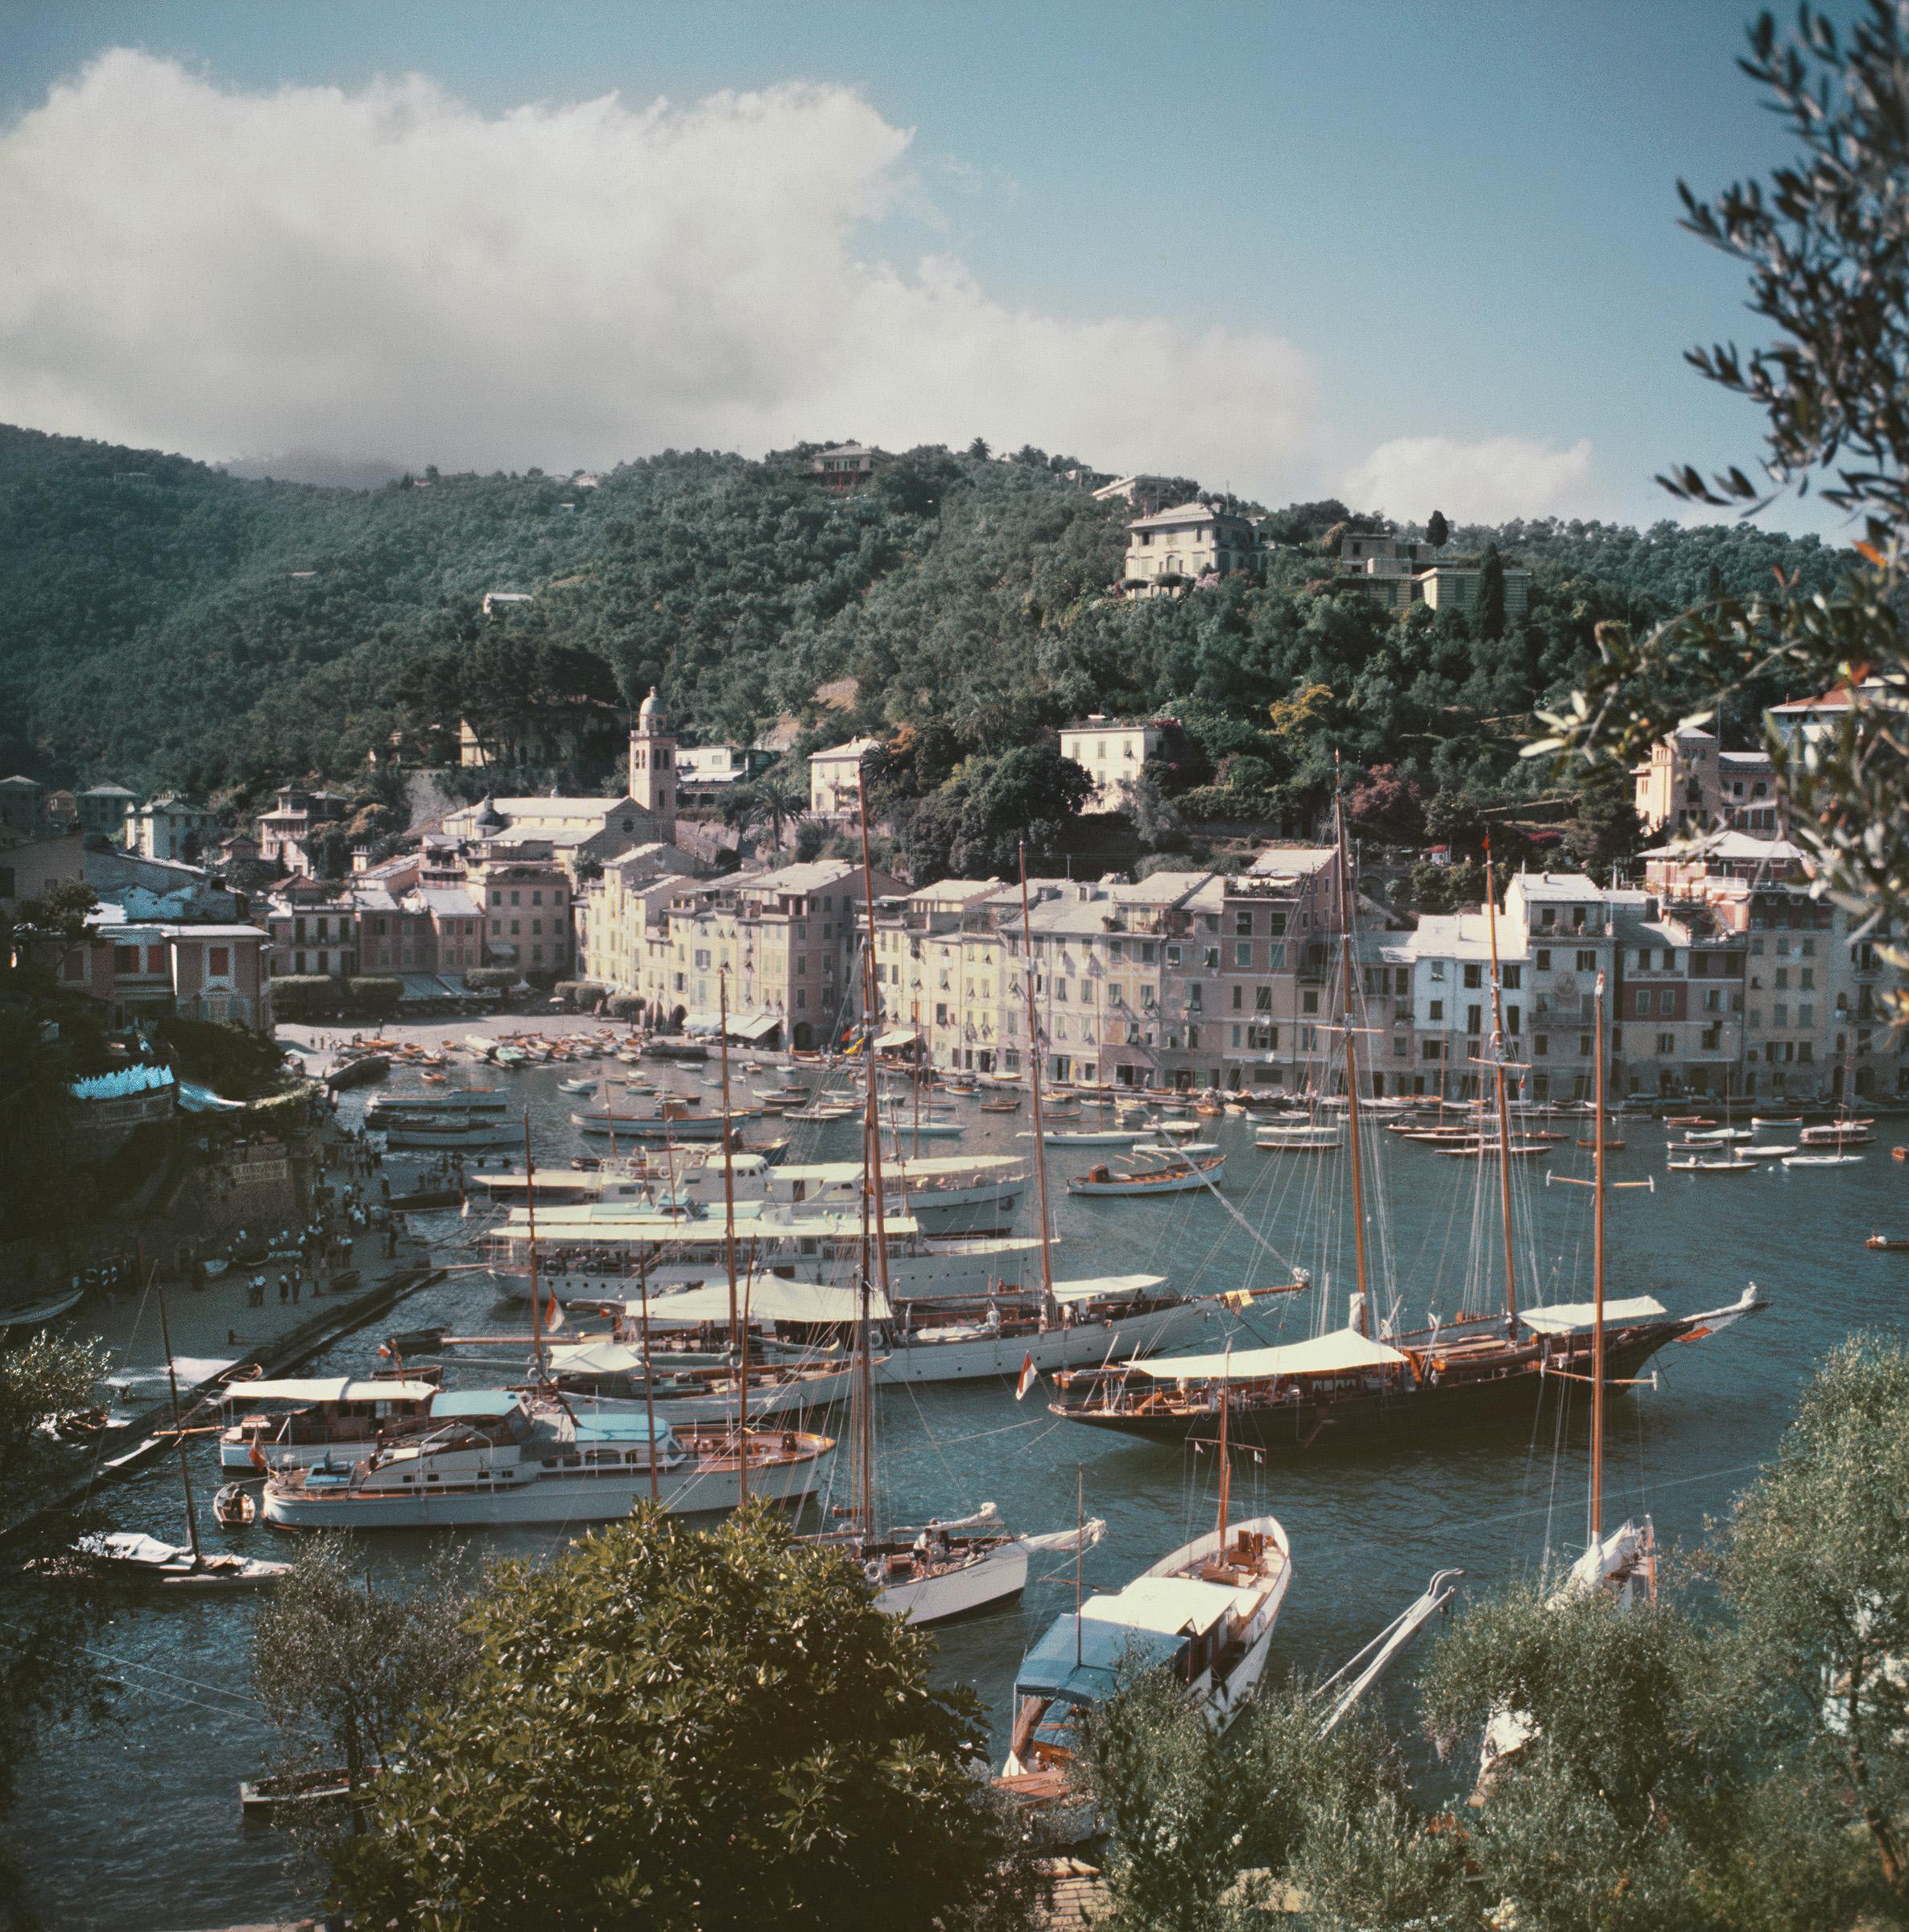 Portofino
1955
C print
Estate stamped and hand numbered edition of 150 with certificate of authenticity from the estate.   

Yachts moored in the Italian fishing village of Portofino, circa 1955. (Photo by Slim Aarons/Getty Images)

Slim Aarons